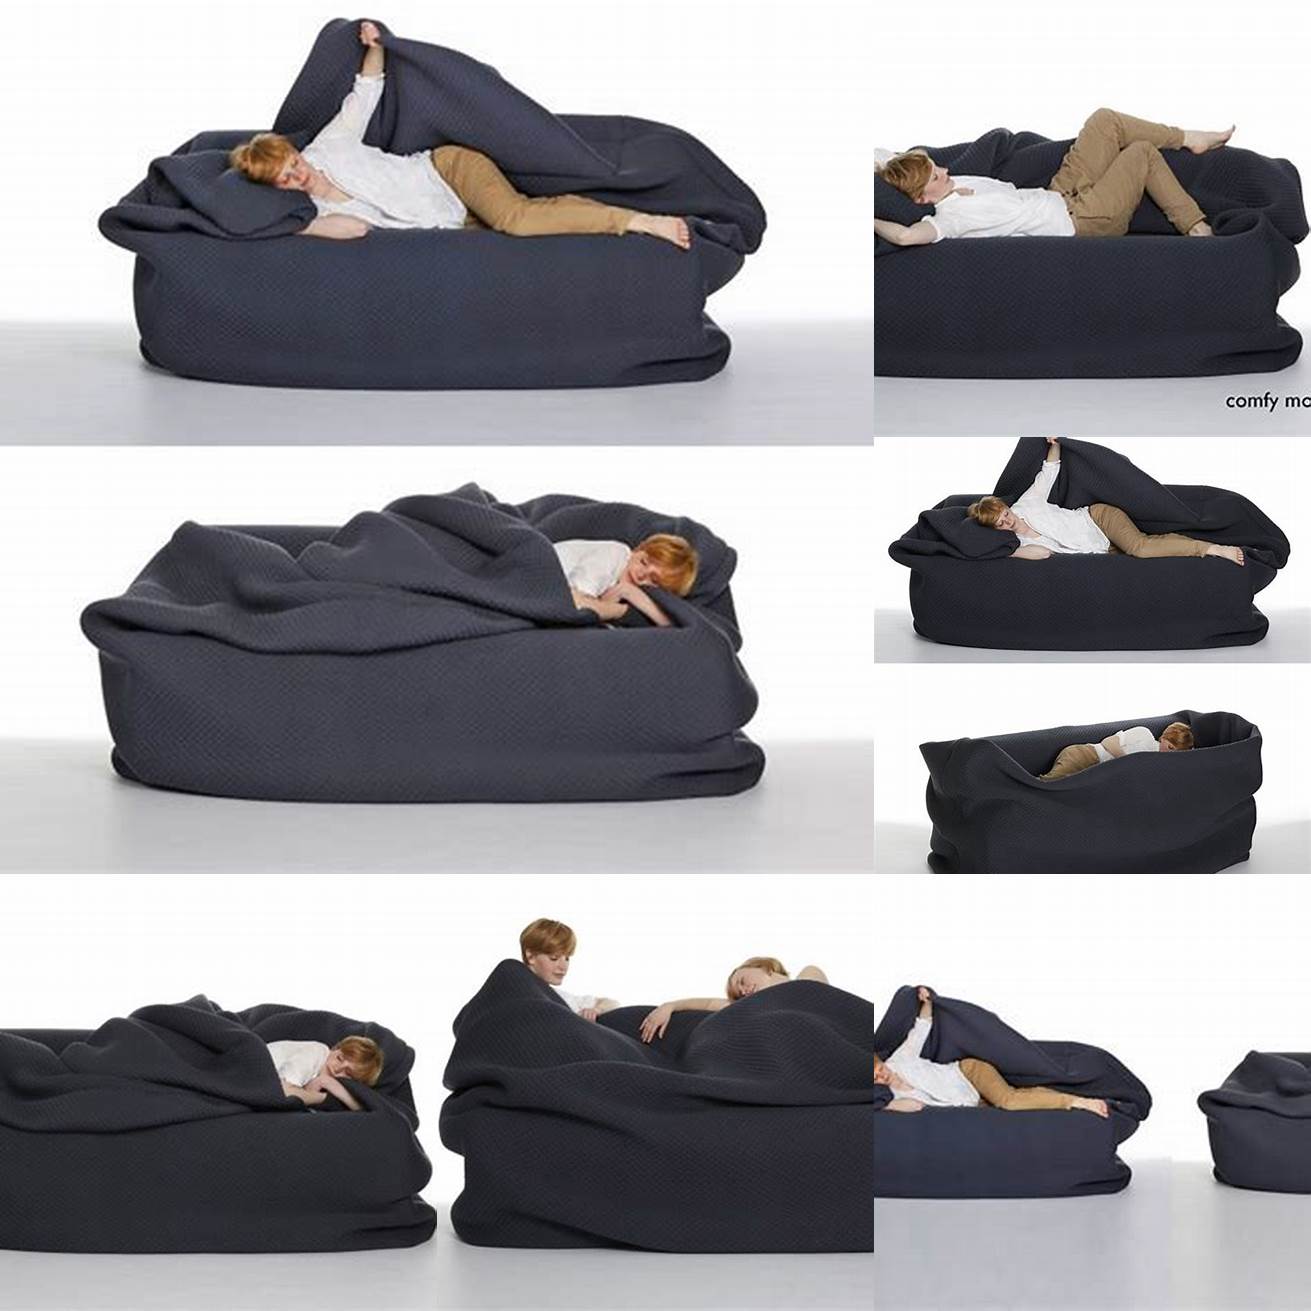 Image of the Bean Bag Bed with Built In Blanket being used by kids or teenagers